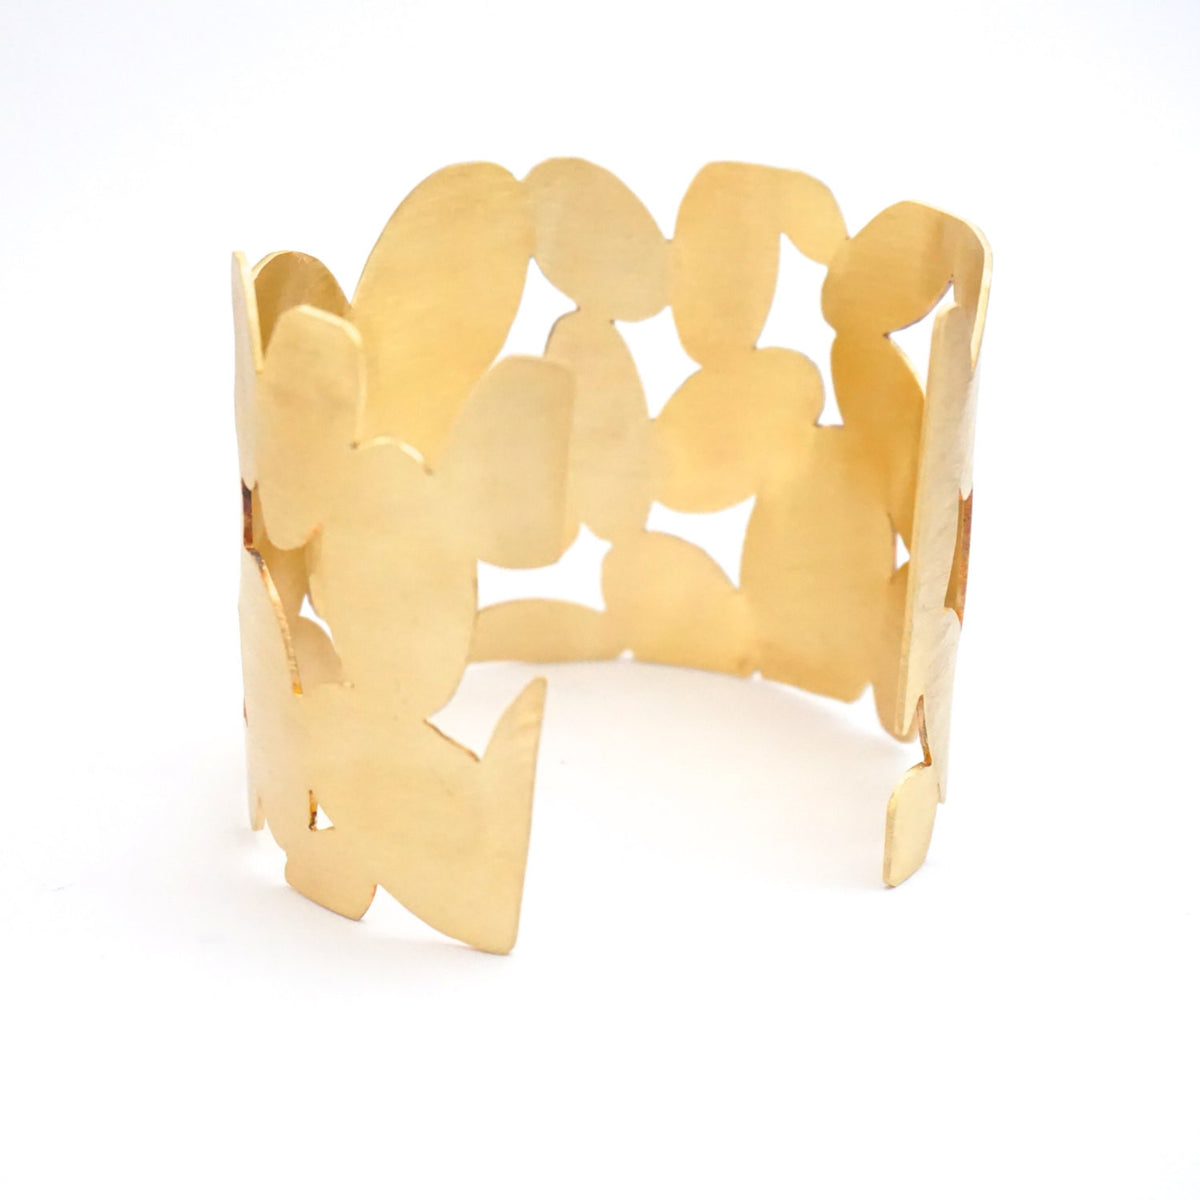 Unique Contemporary Classic Large Hand-Made Oval, Cut Out Gold Colored Brass Cuff Bracelet - 0082 - Virginia Wynne Designs